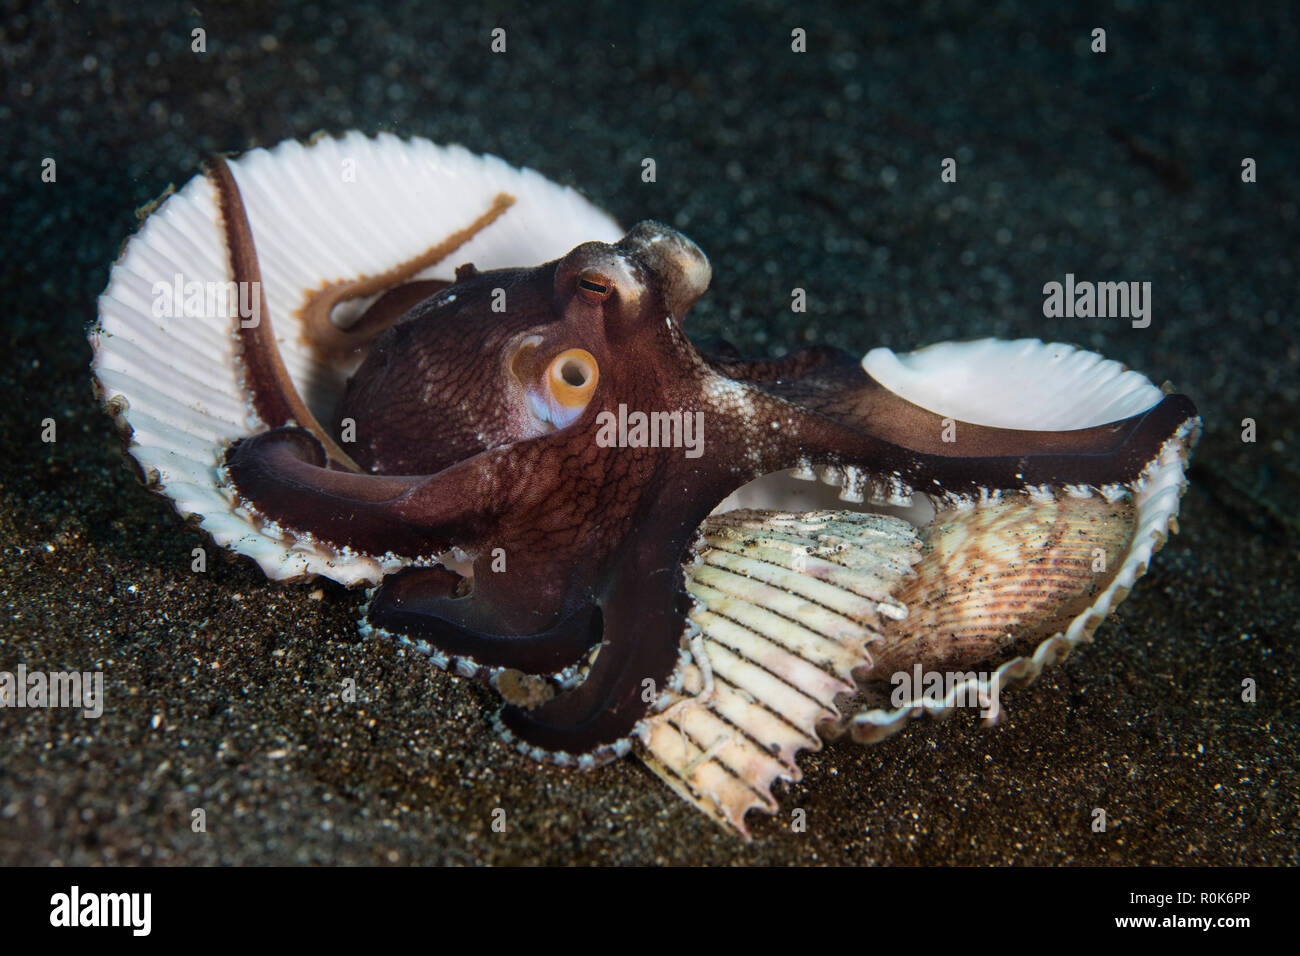 A coconut octopus clings to shells on the seafloor. Stock Photo